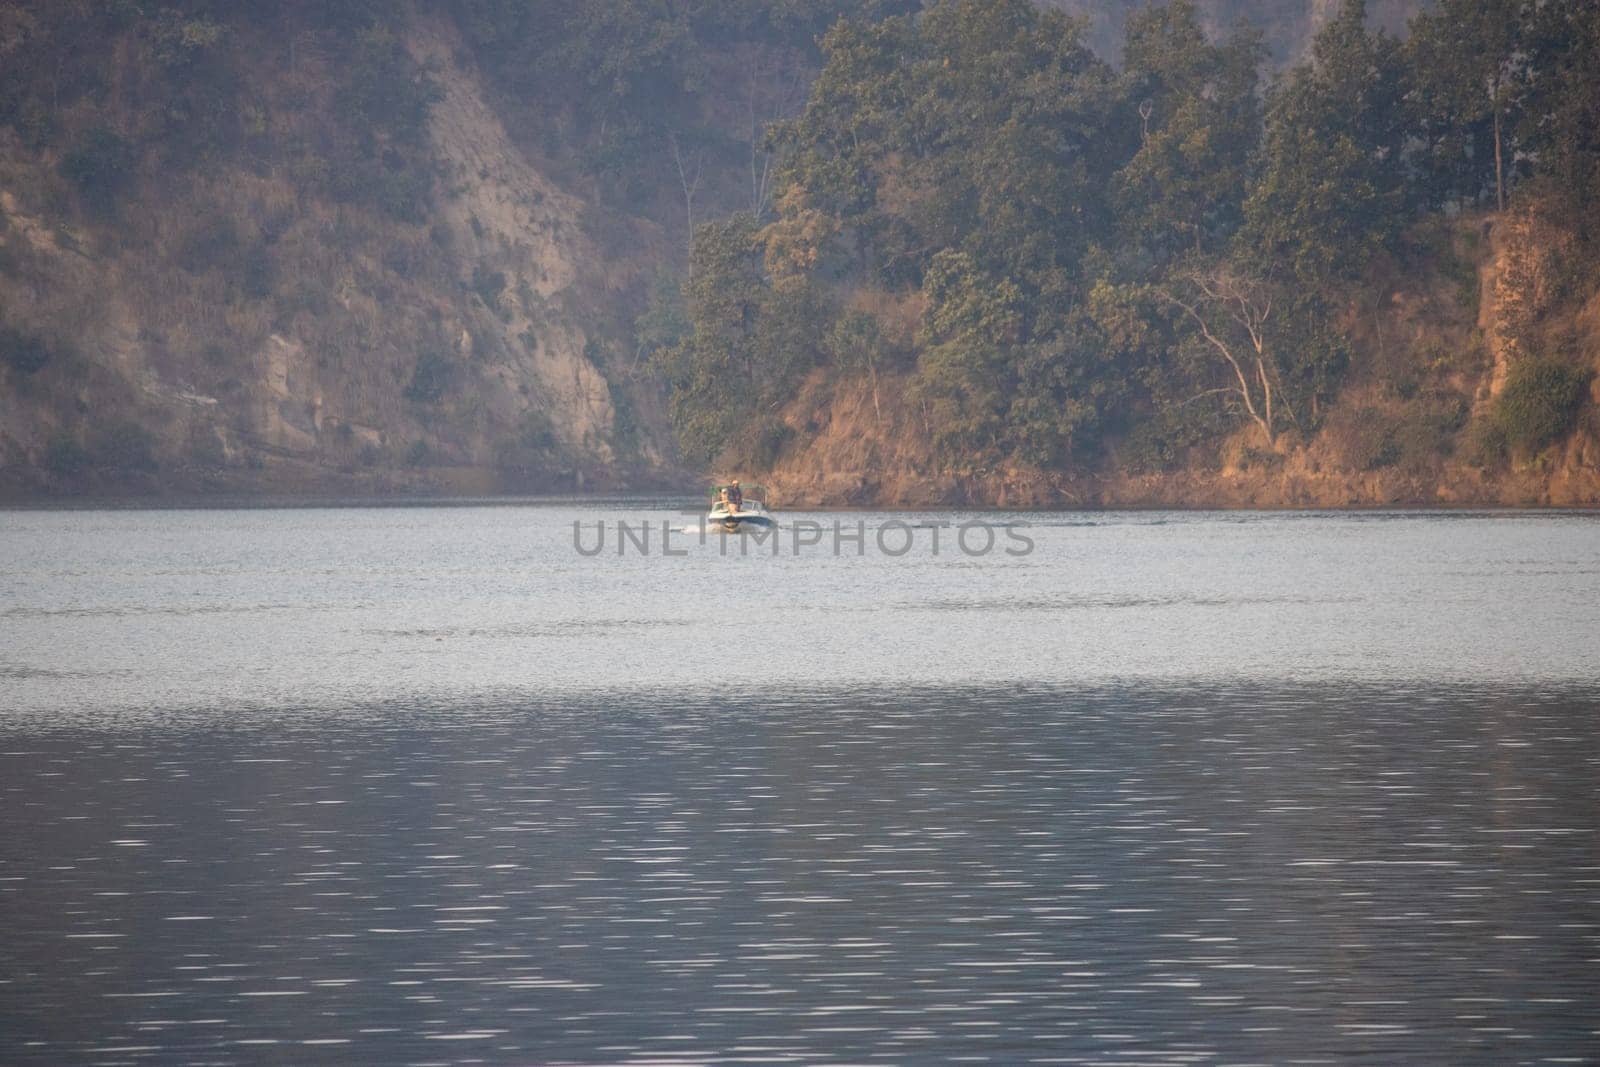 Beauty of water boats gracefully navigating Uttarakhand's rivers.High quality image